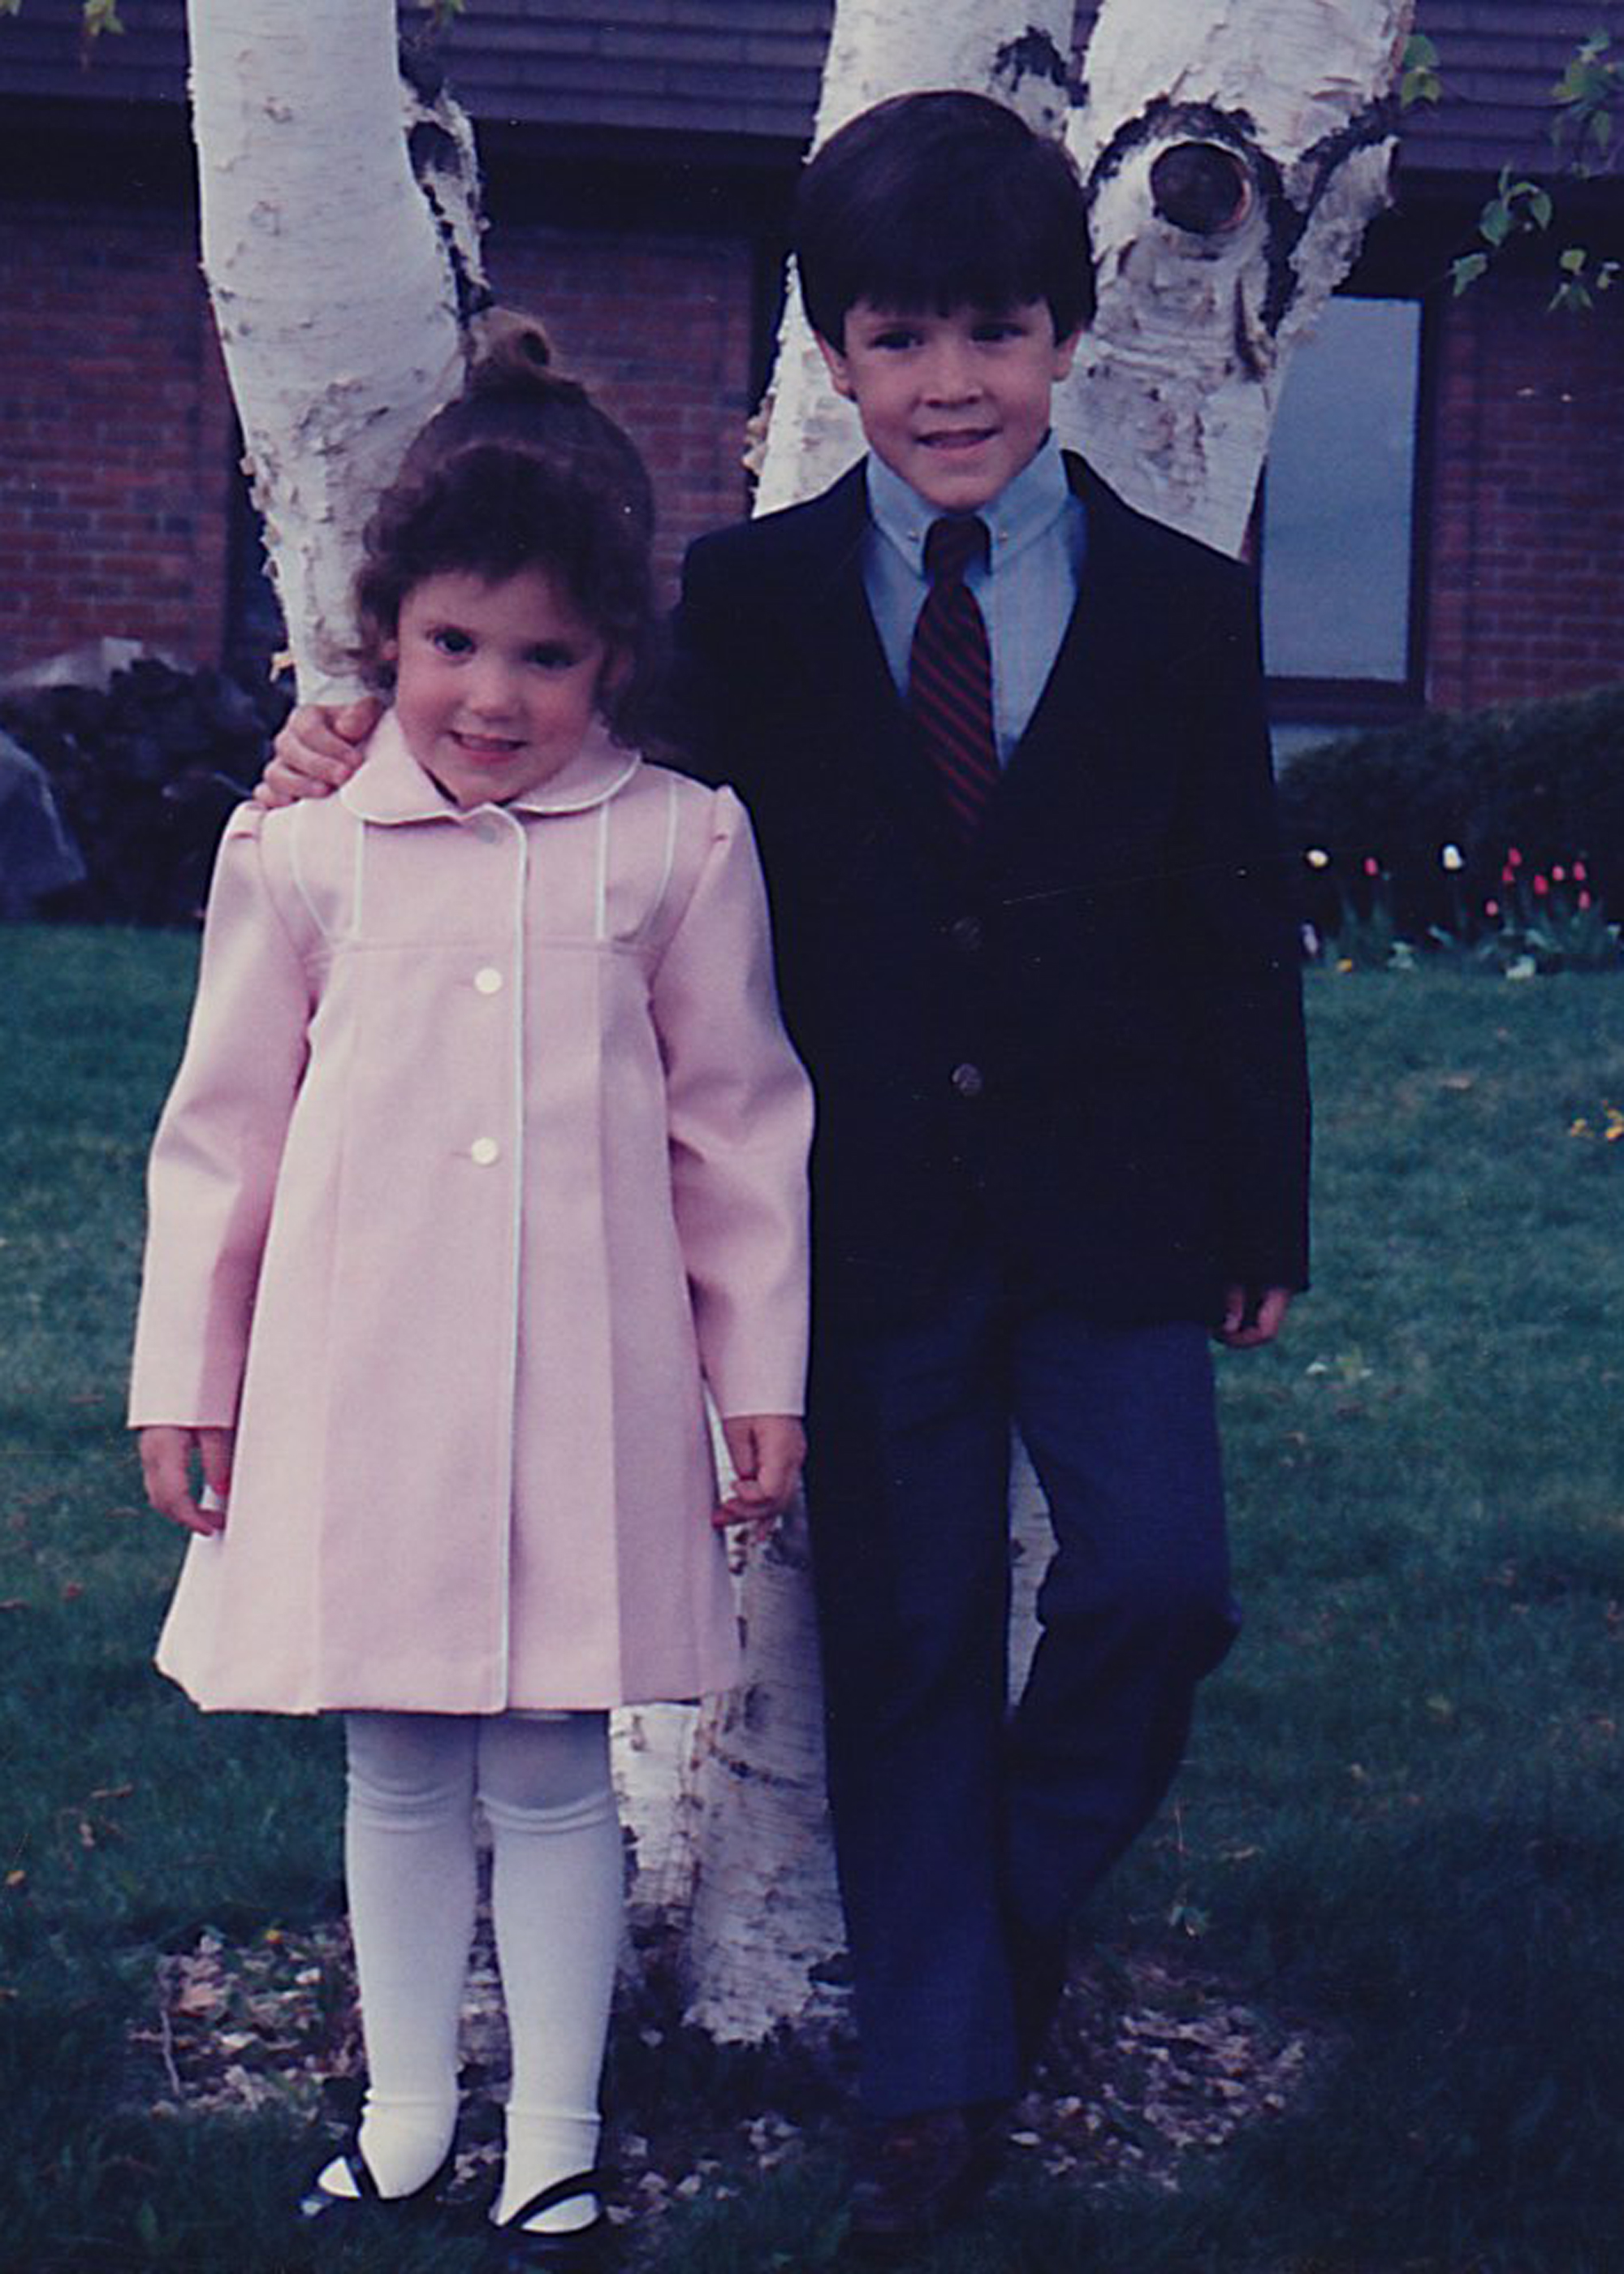 Michael and Torie Dressed Up.jpg